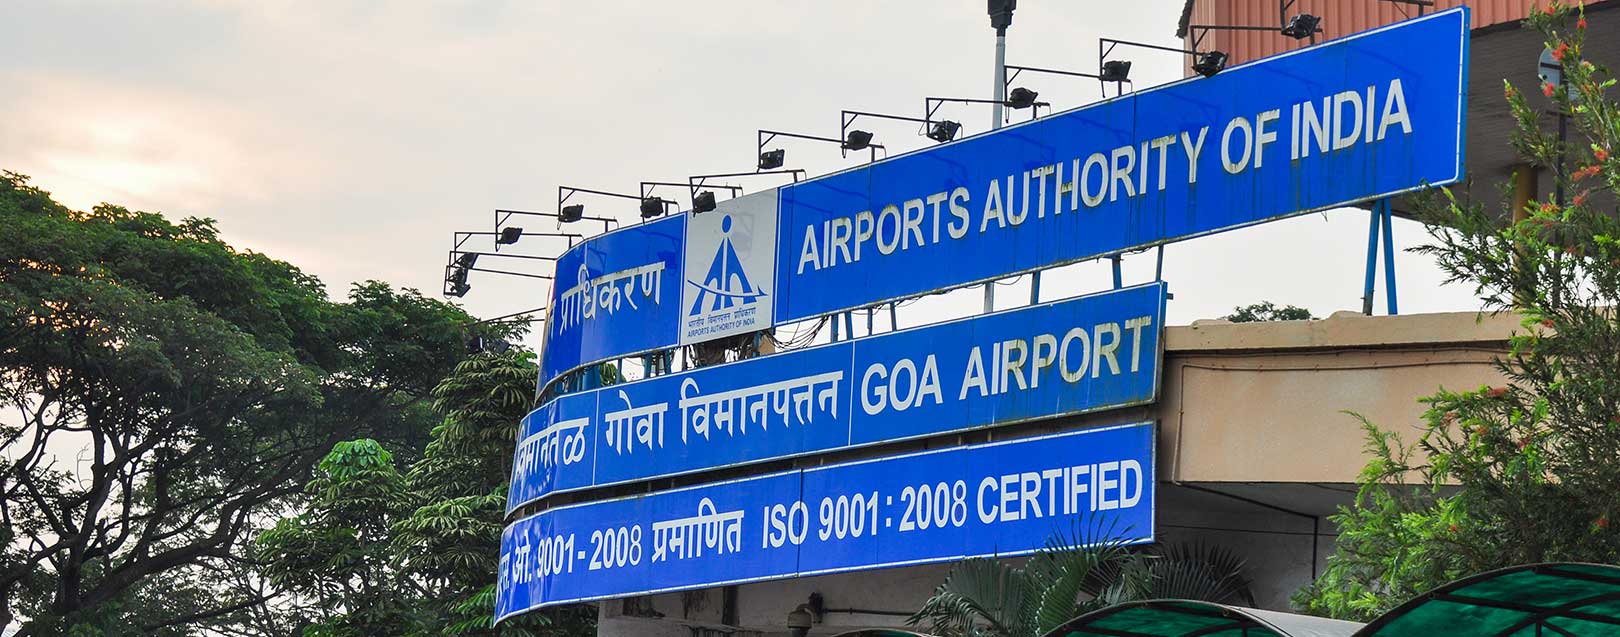 GMR Intl Airport to develop and operate Greenfield International airport at Goa